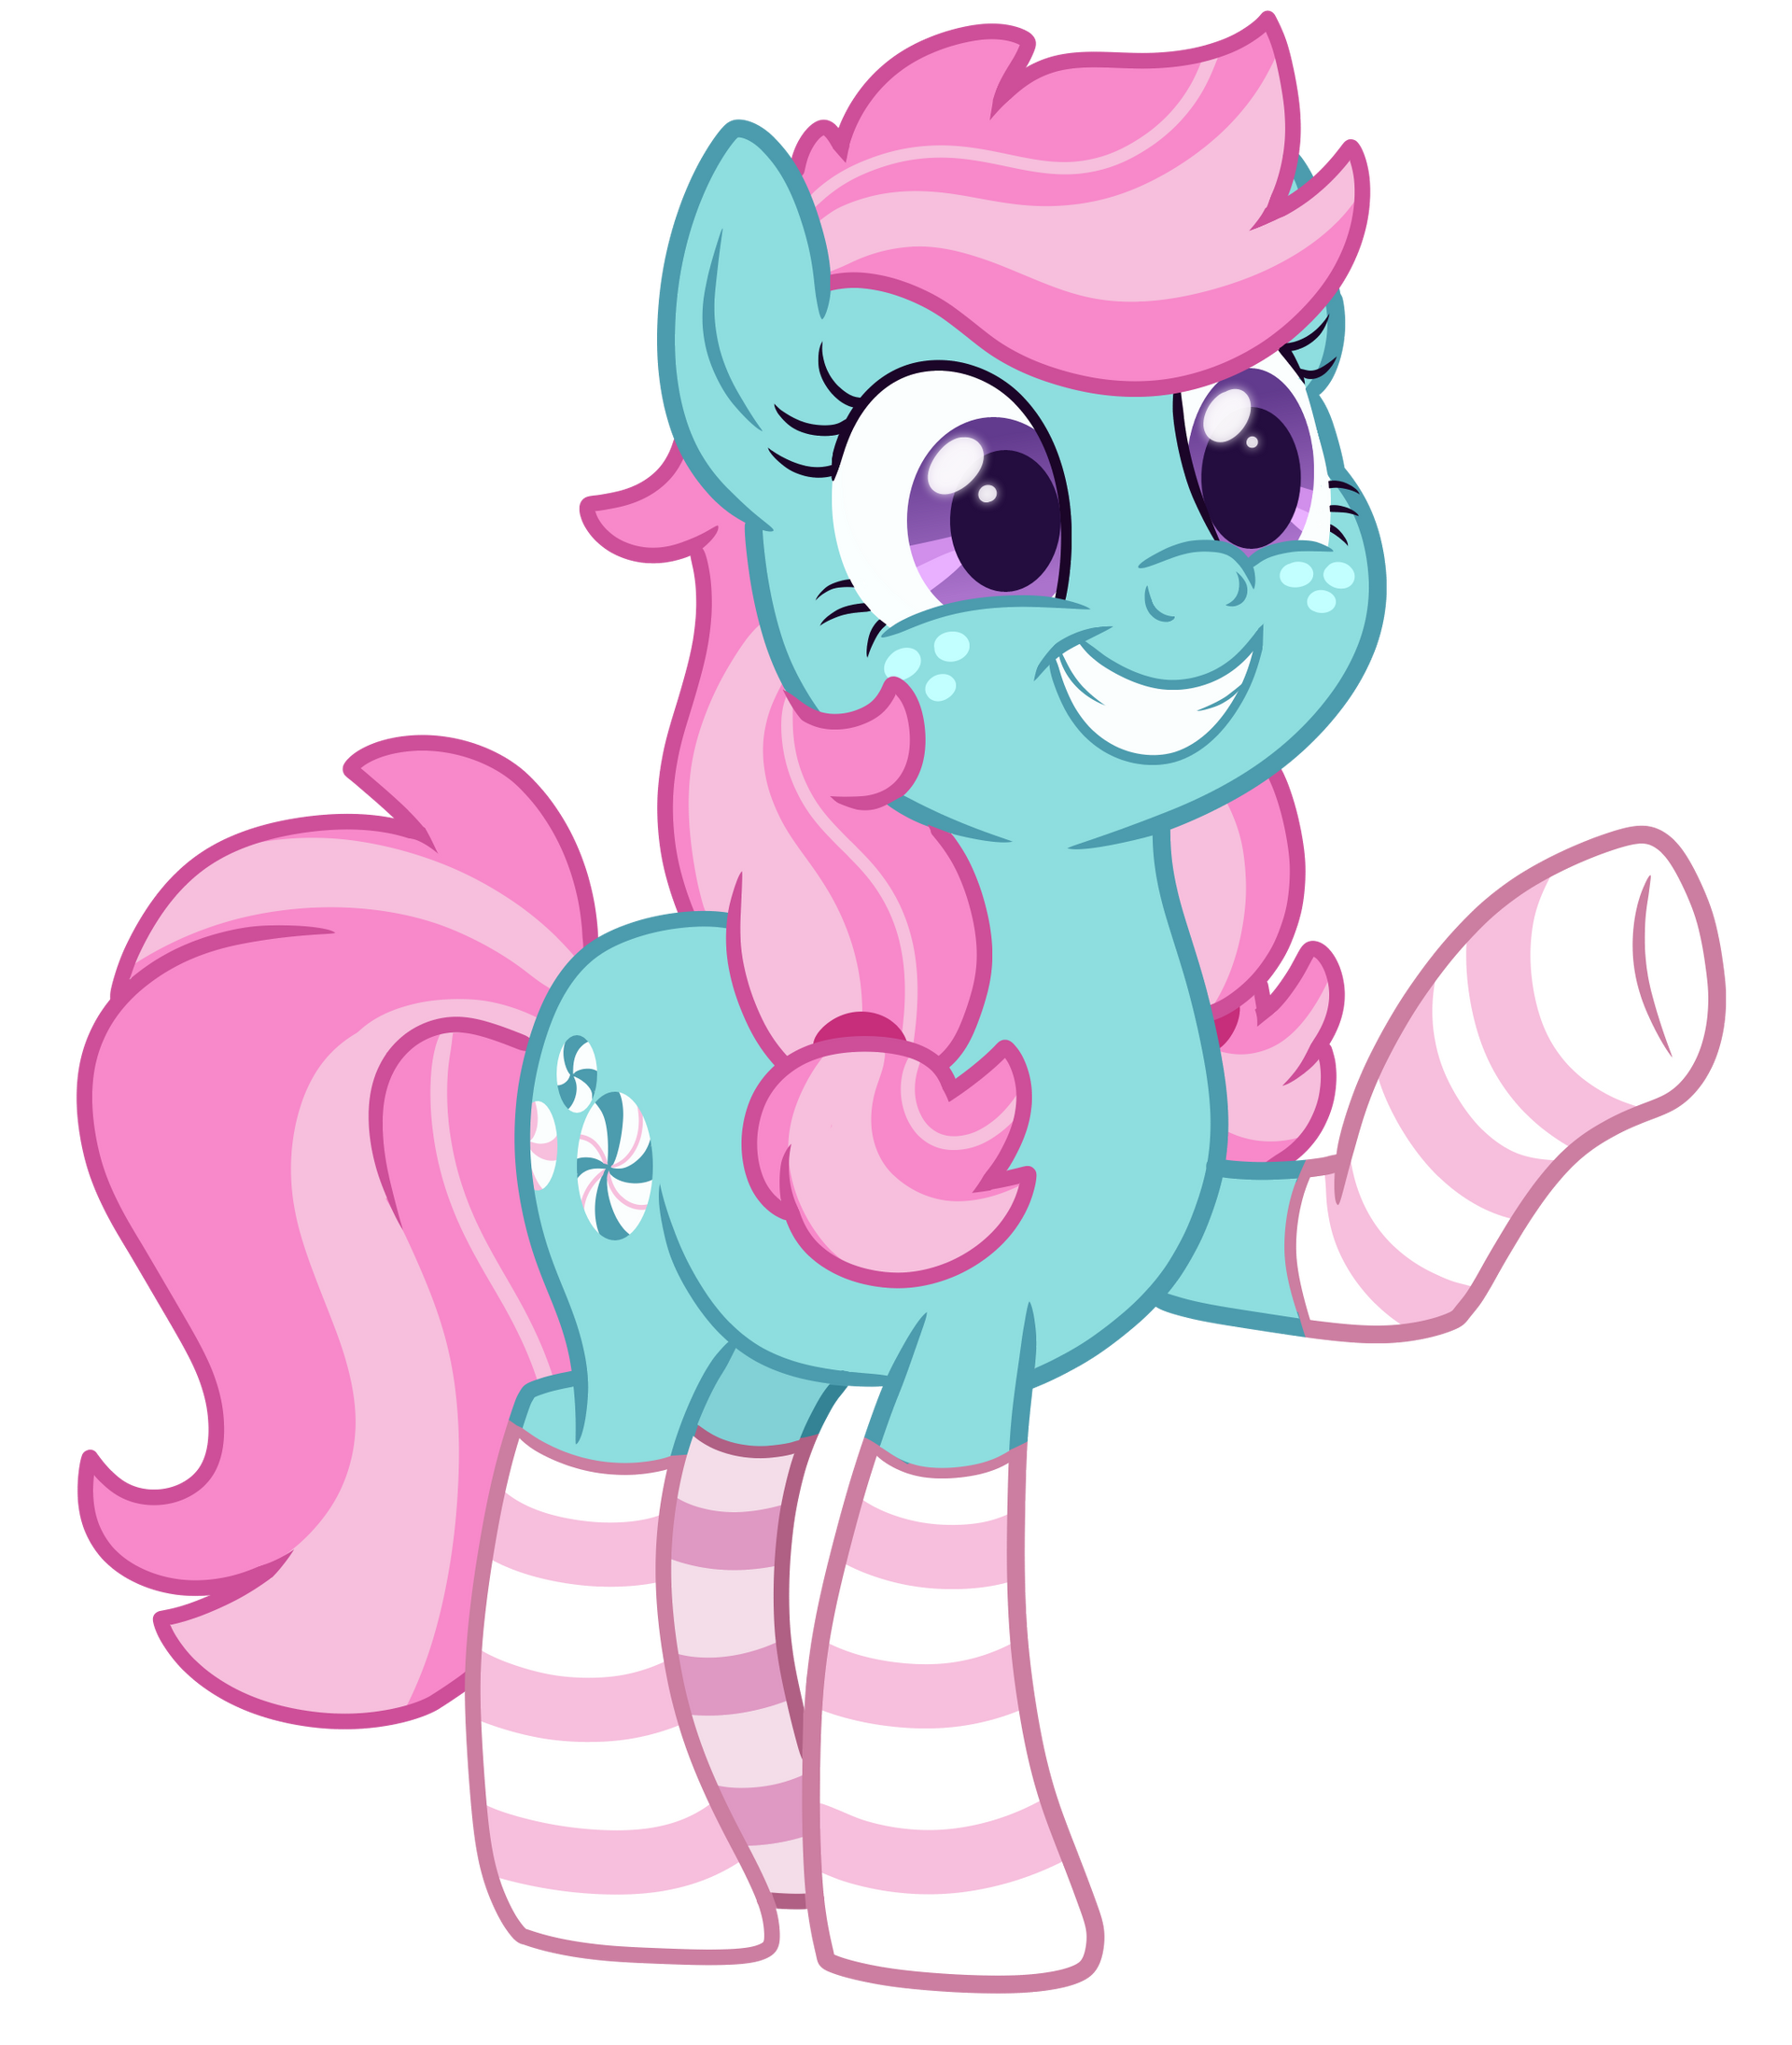 _vector__minty_by_bishopony_decfn1e-fullview.png